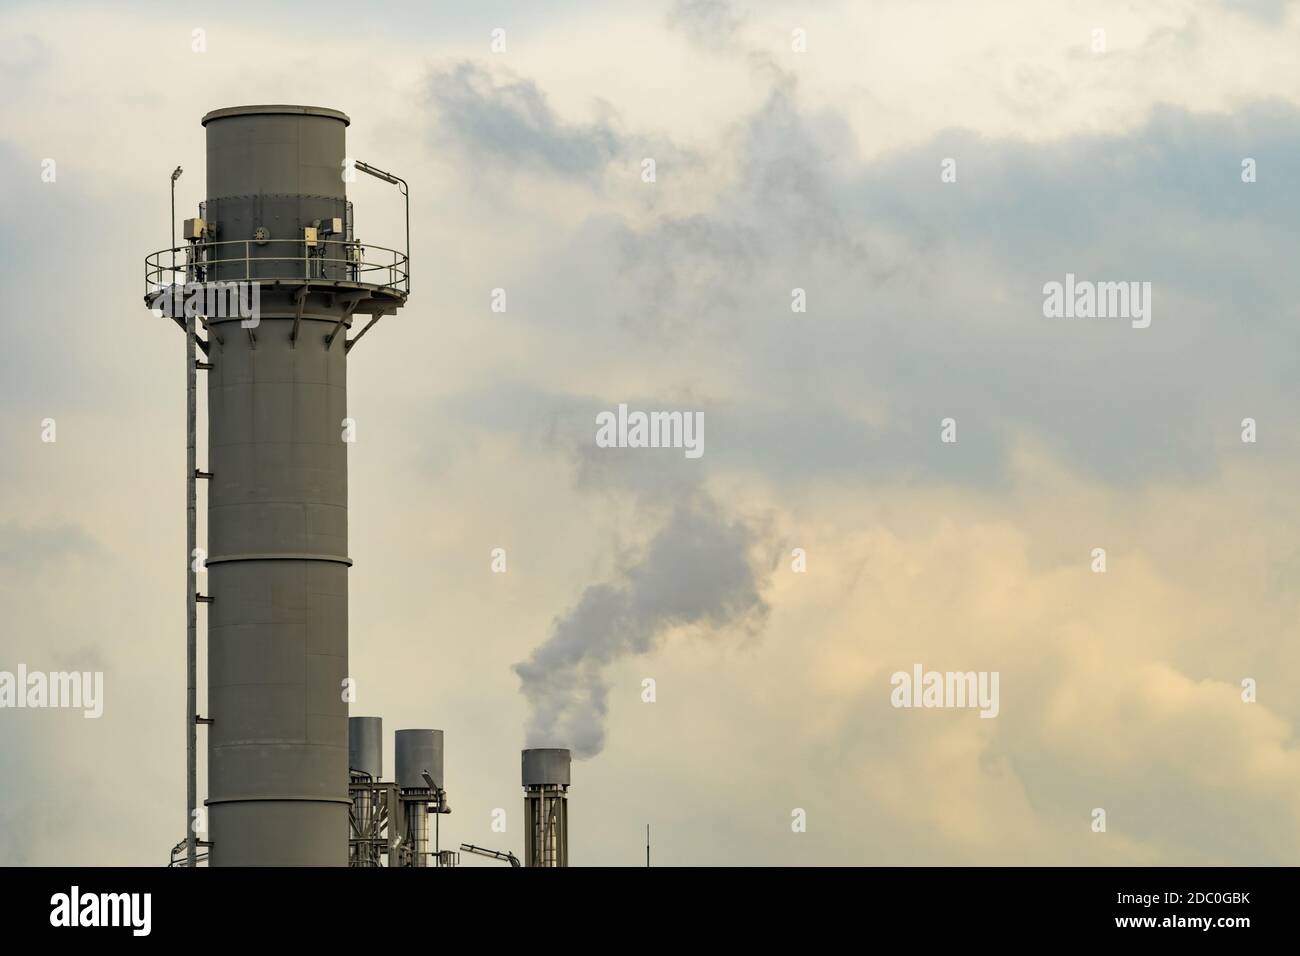 Air pollution from factory. Black smoke from chimney of industrial pipe. Global warming problem concept. Air pollutant emission factors. Air contamina Stock Photo